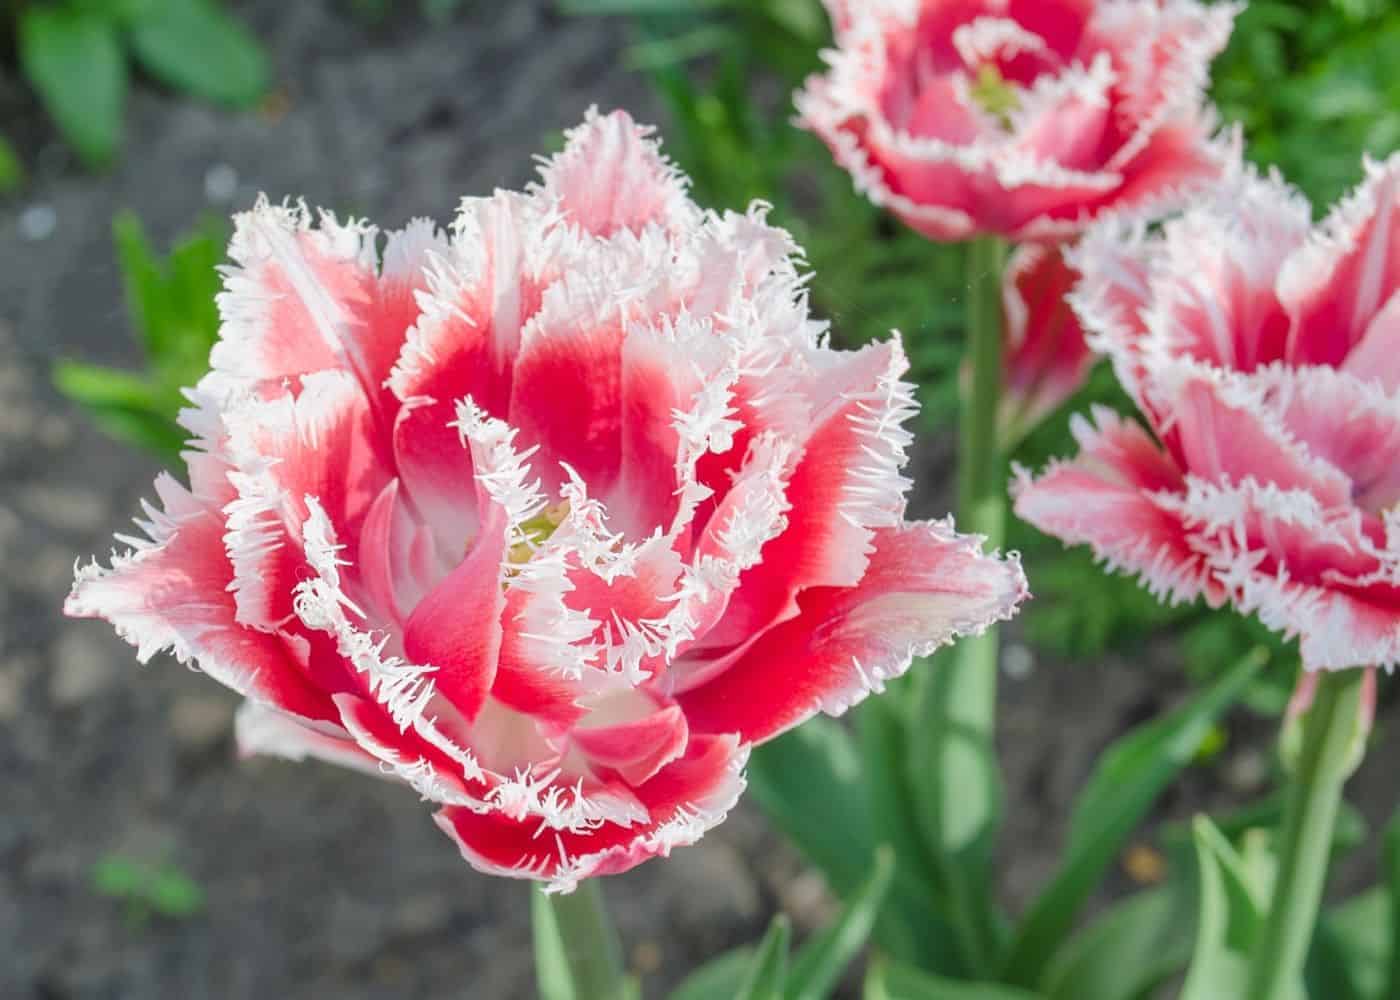 Types of tulips - queensland fringed